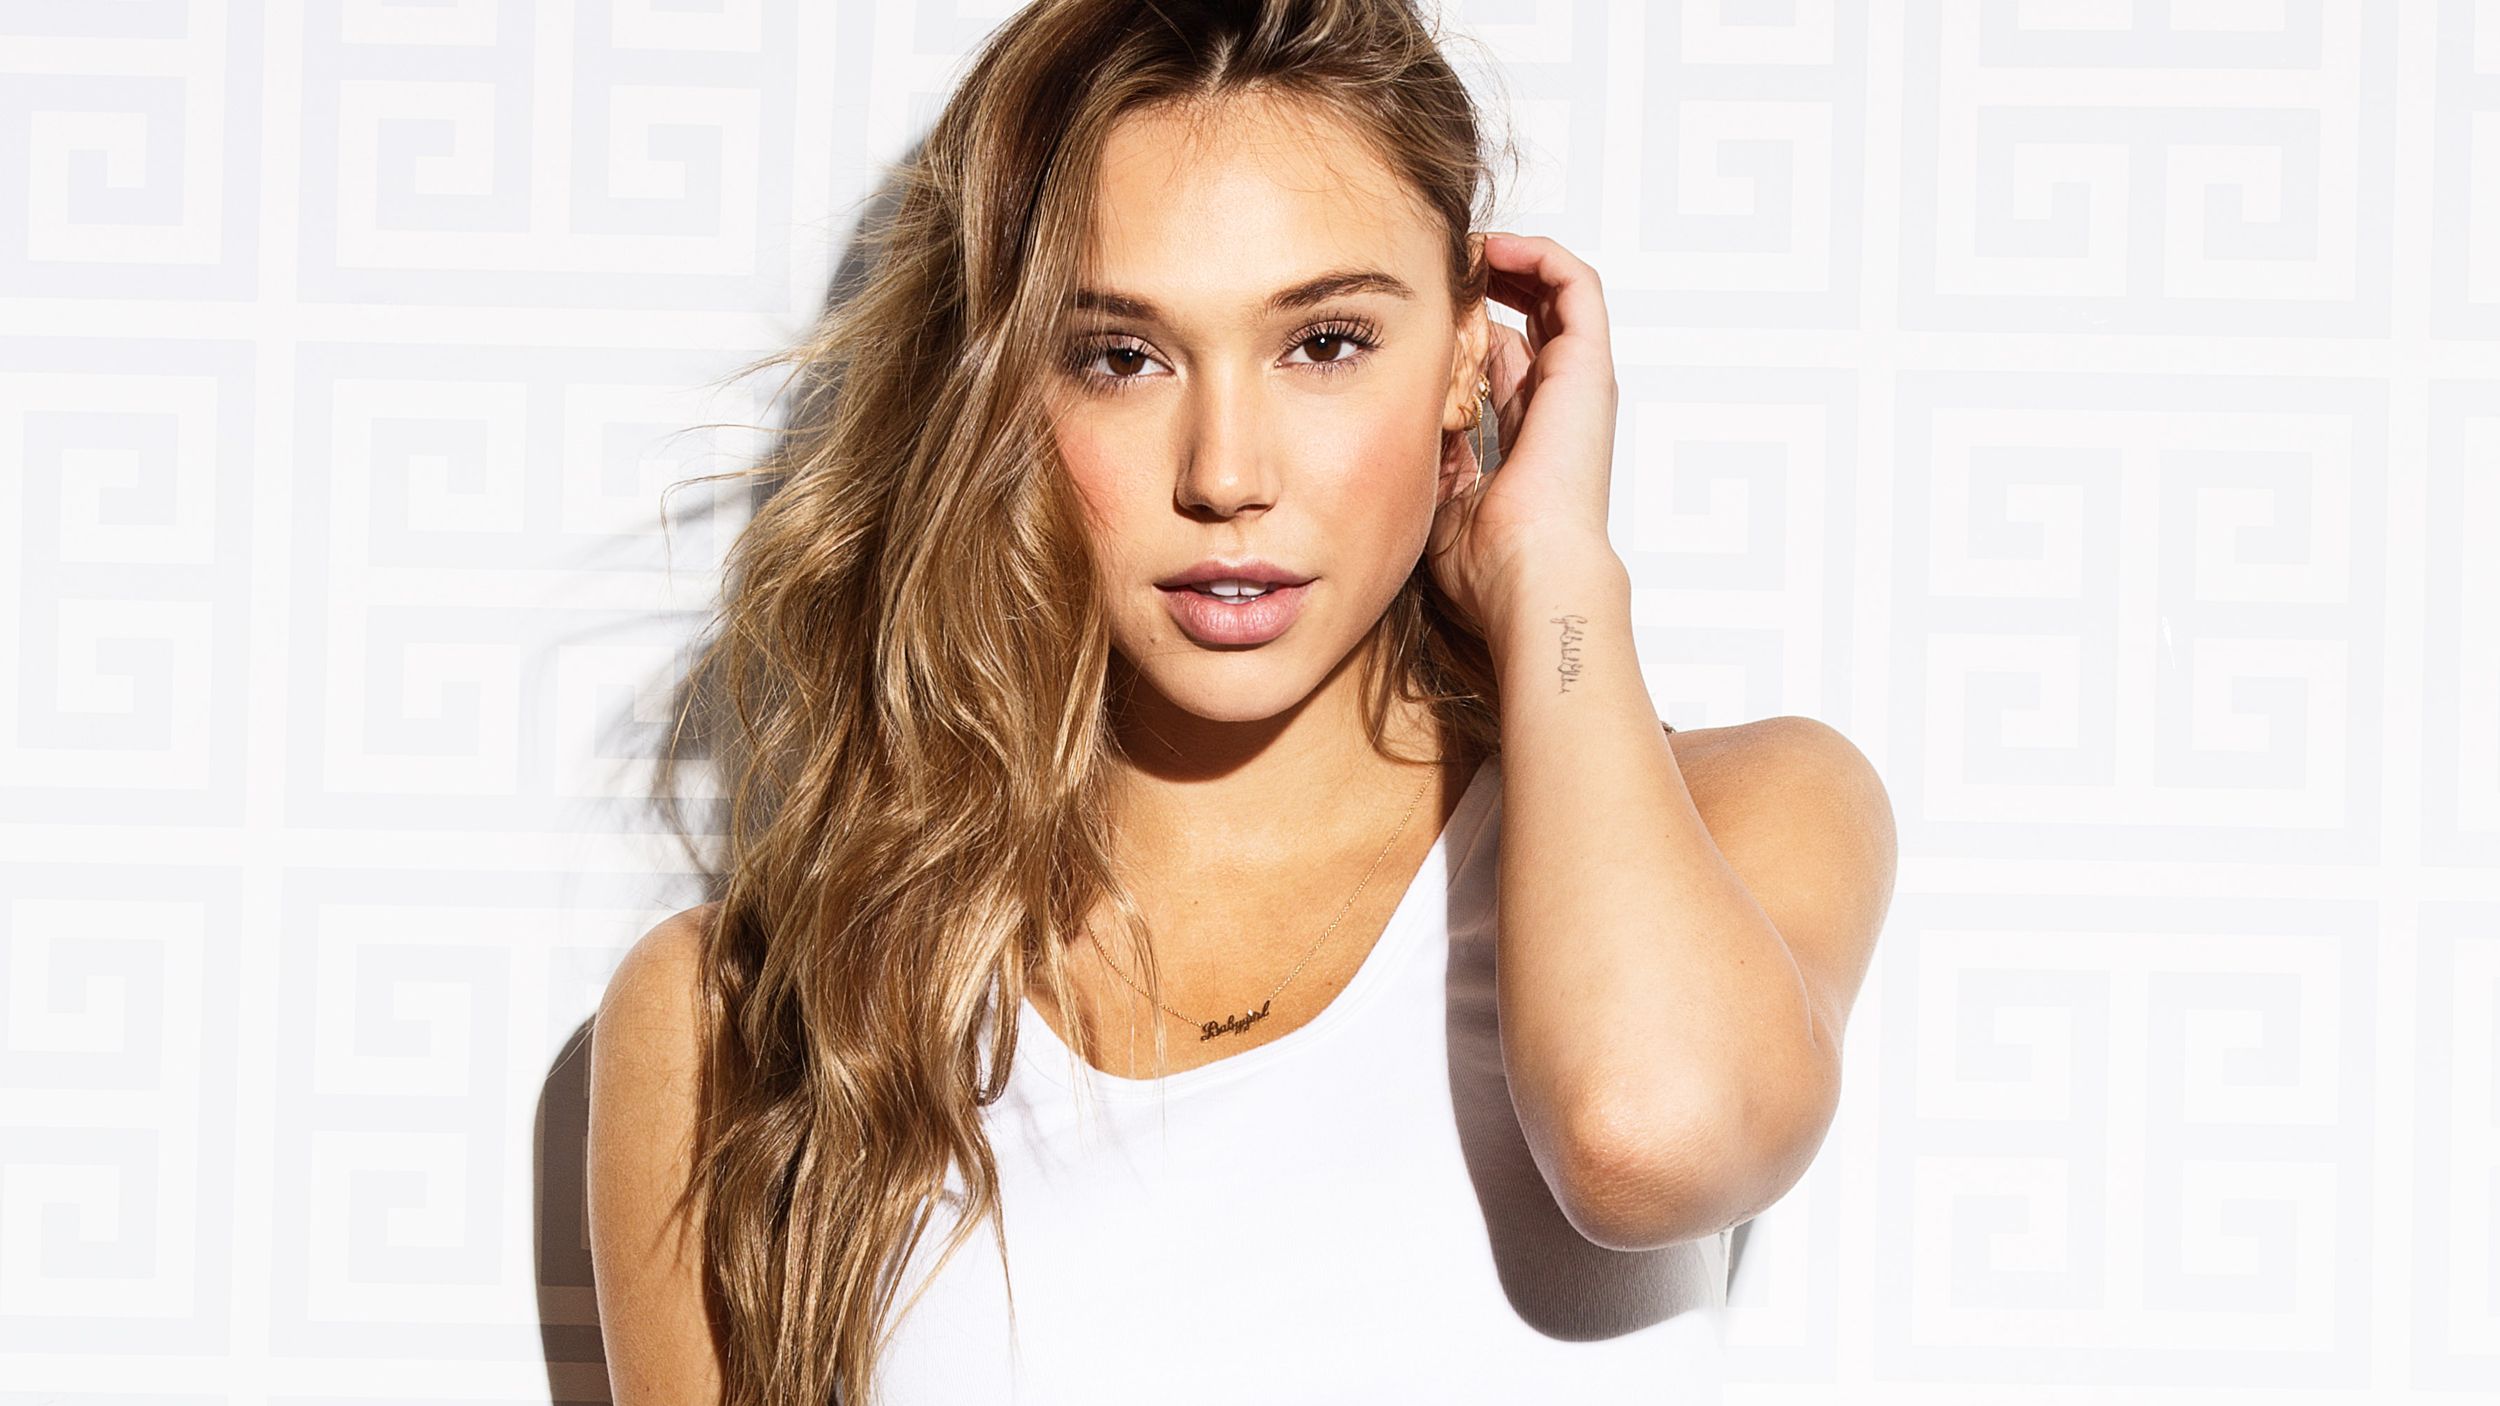 Alexis Ren Talks About Her Eating Disorder Instagram Star And Model Alexis Ren Interview